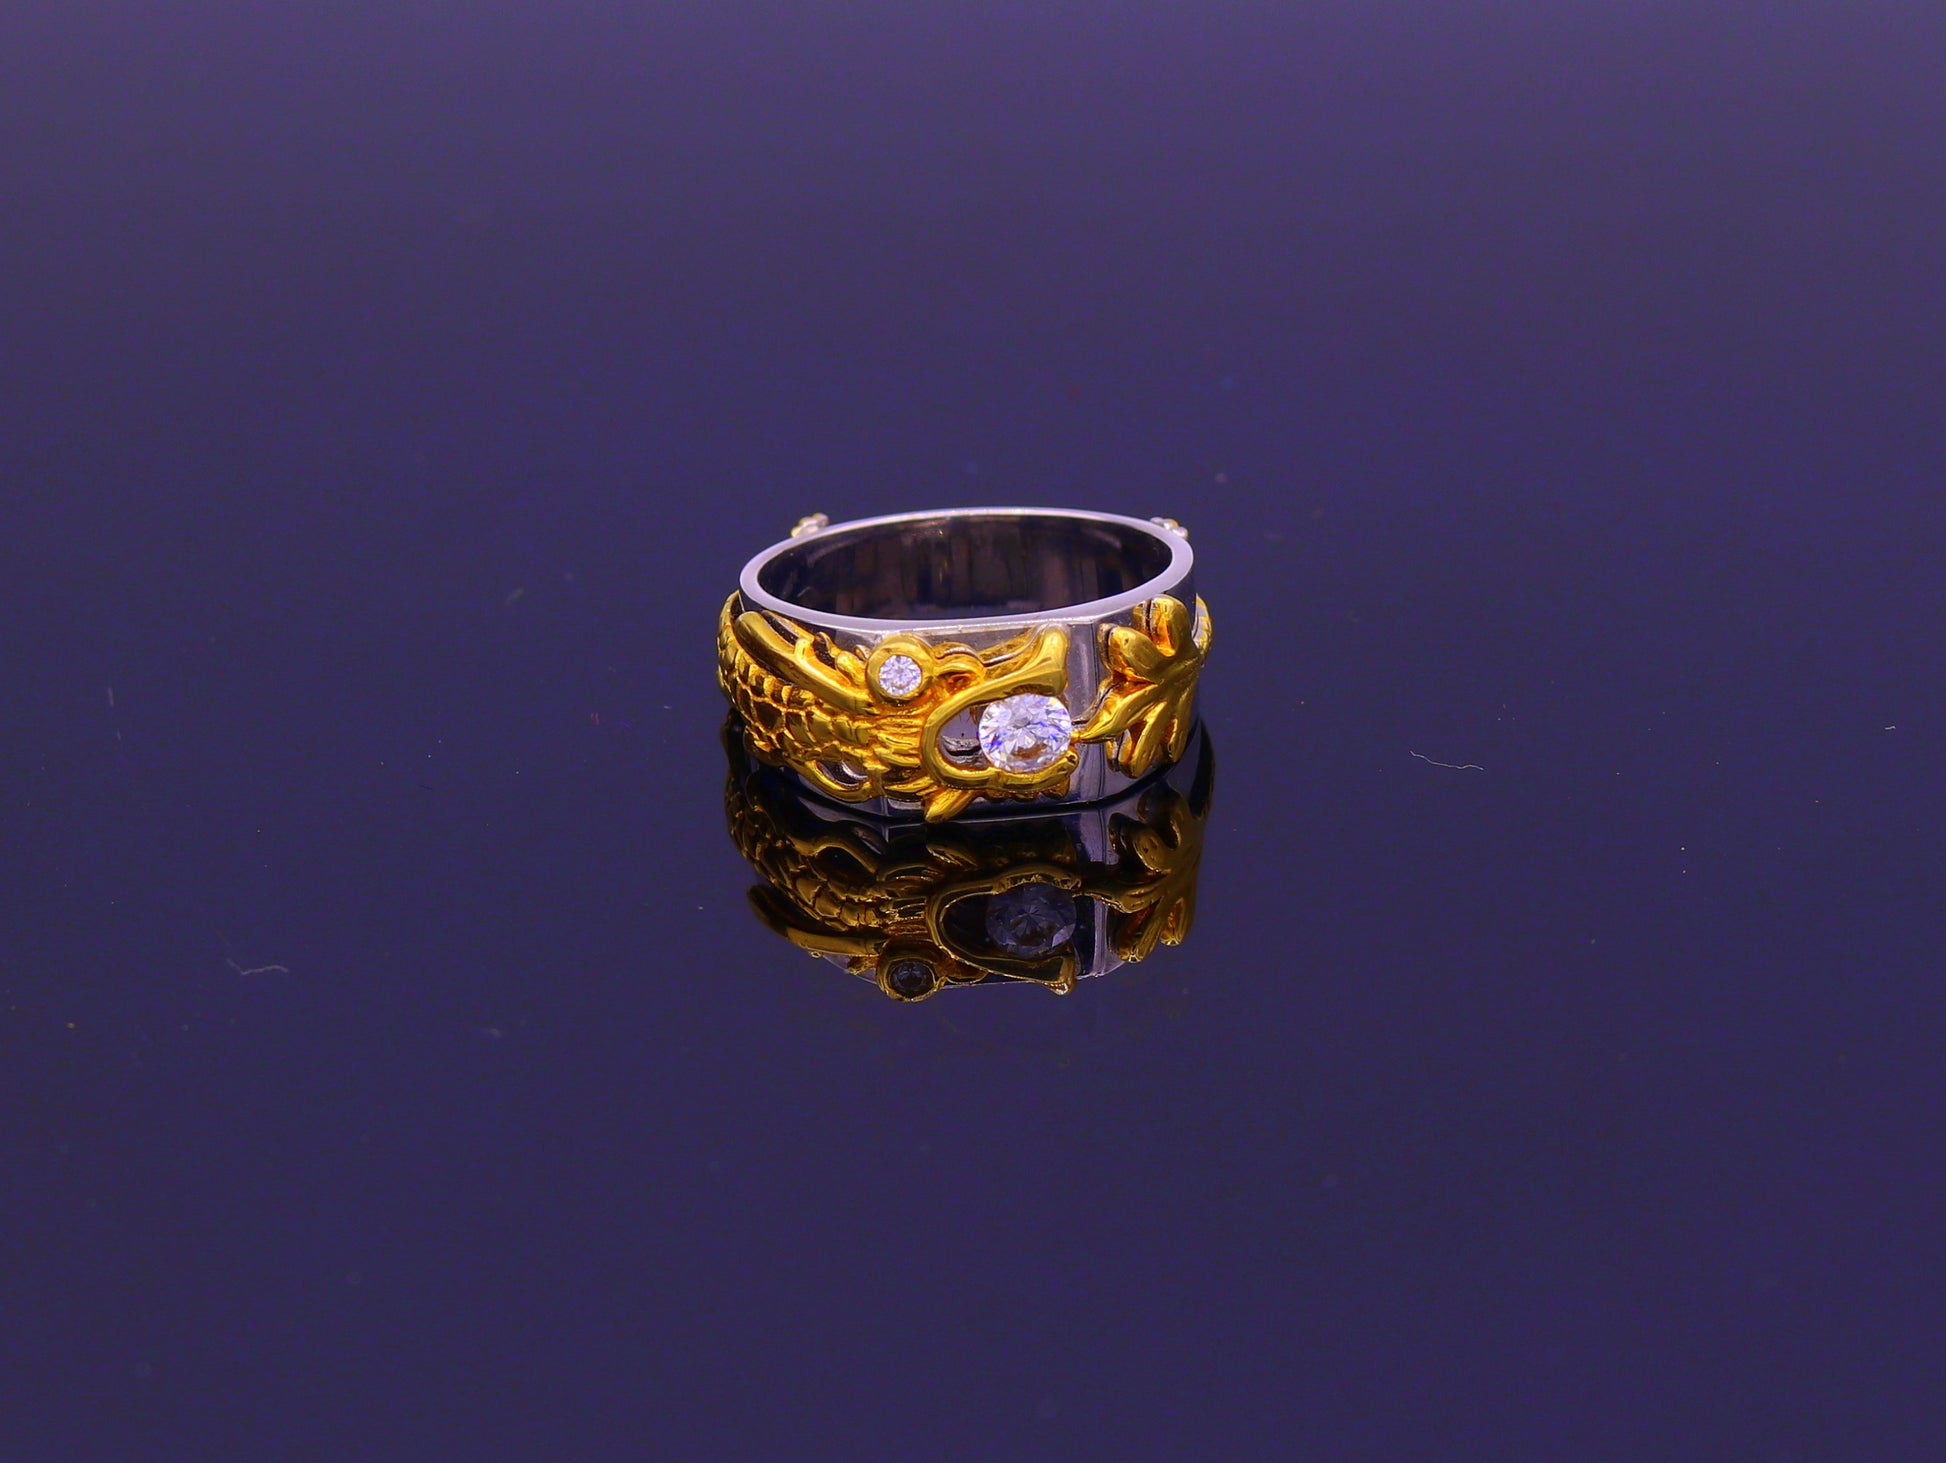 18k yellow gold and white gold ring band fabulous dragon design stylish fancy work wedding rings antique women's jewelry gring32 - TRIBAL ORNAMENTS